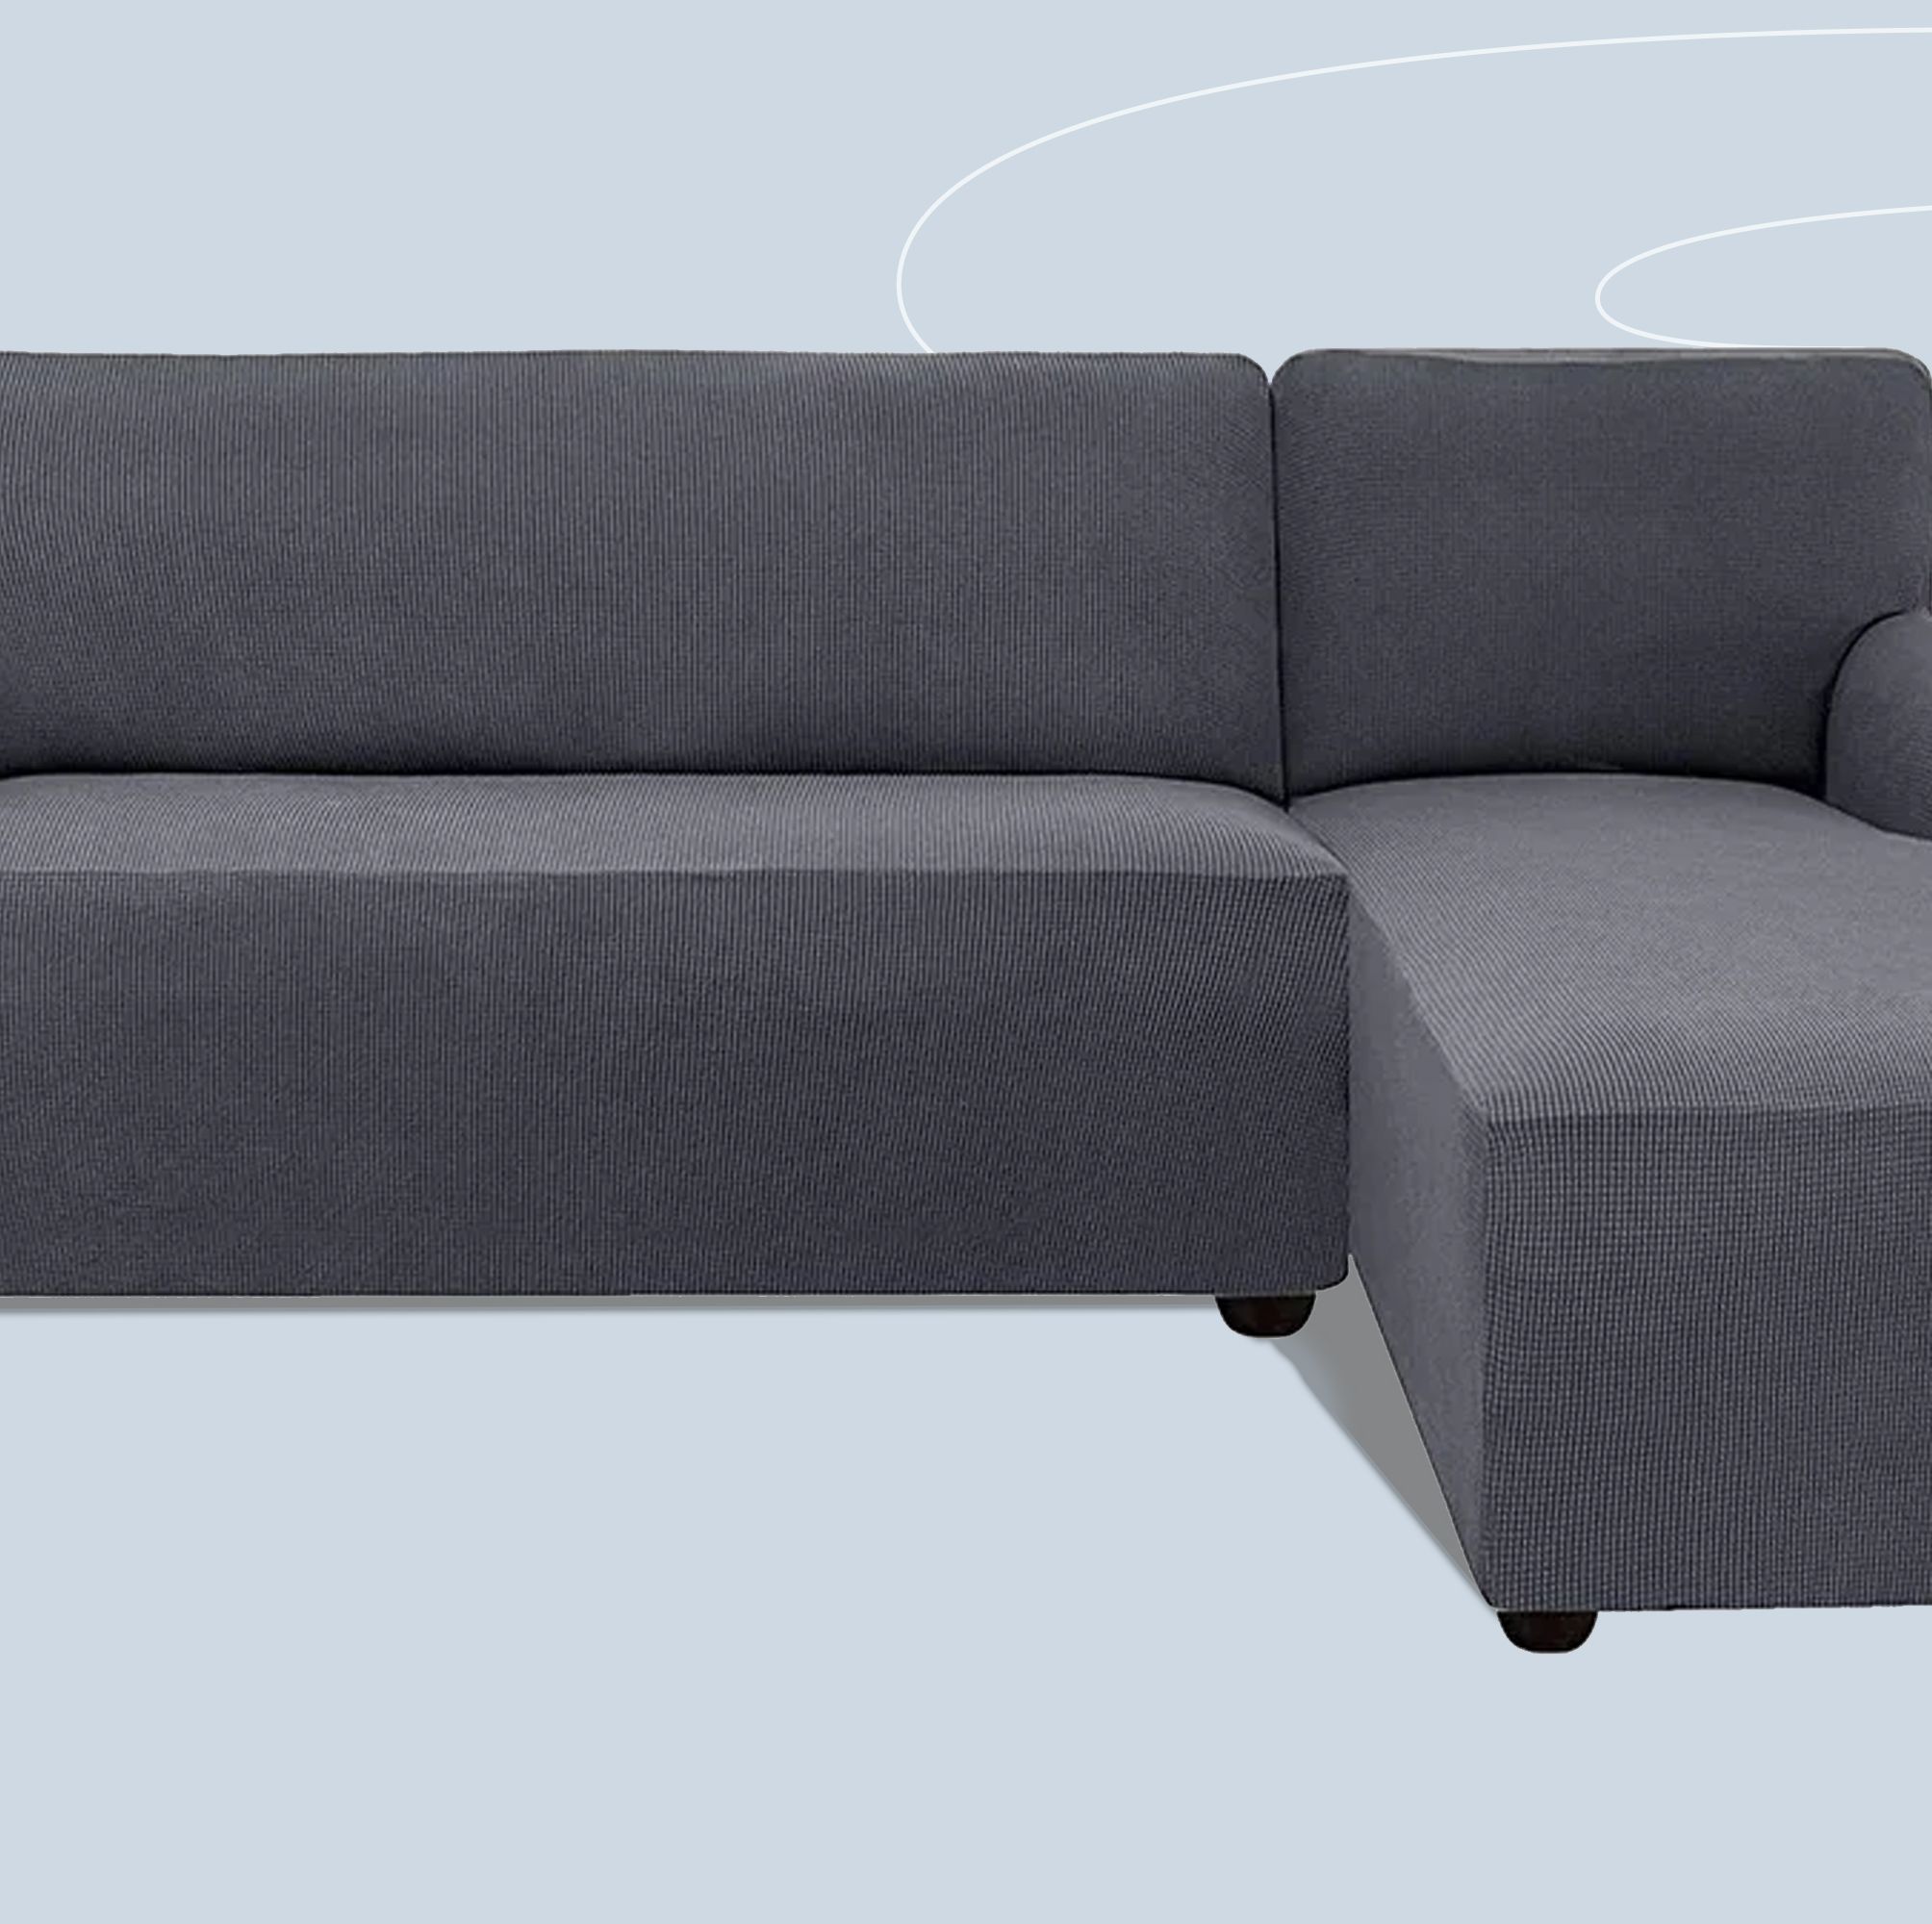 12 Sofa Covers That'll Keep Your Couch Looking New